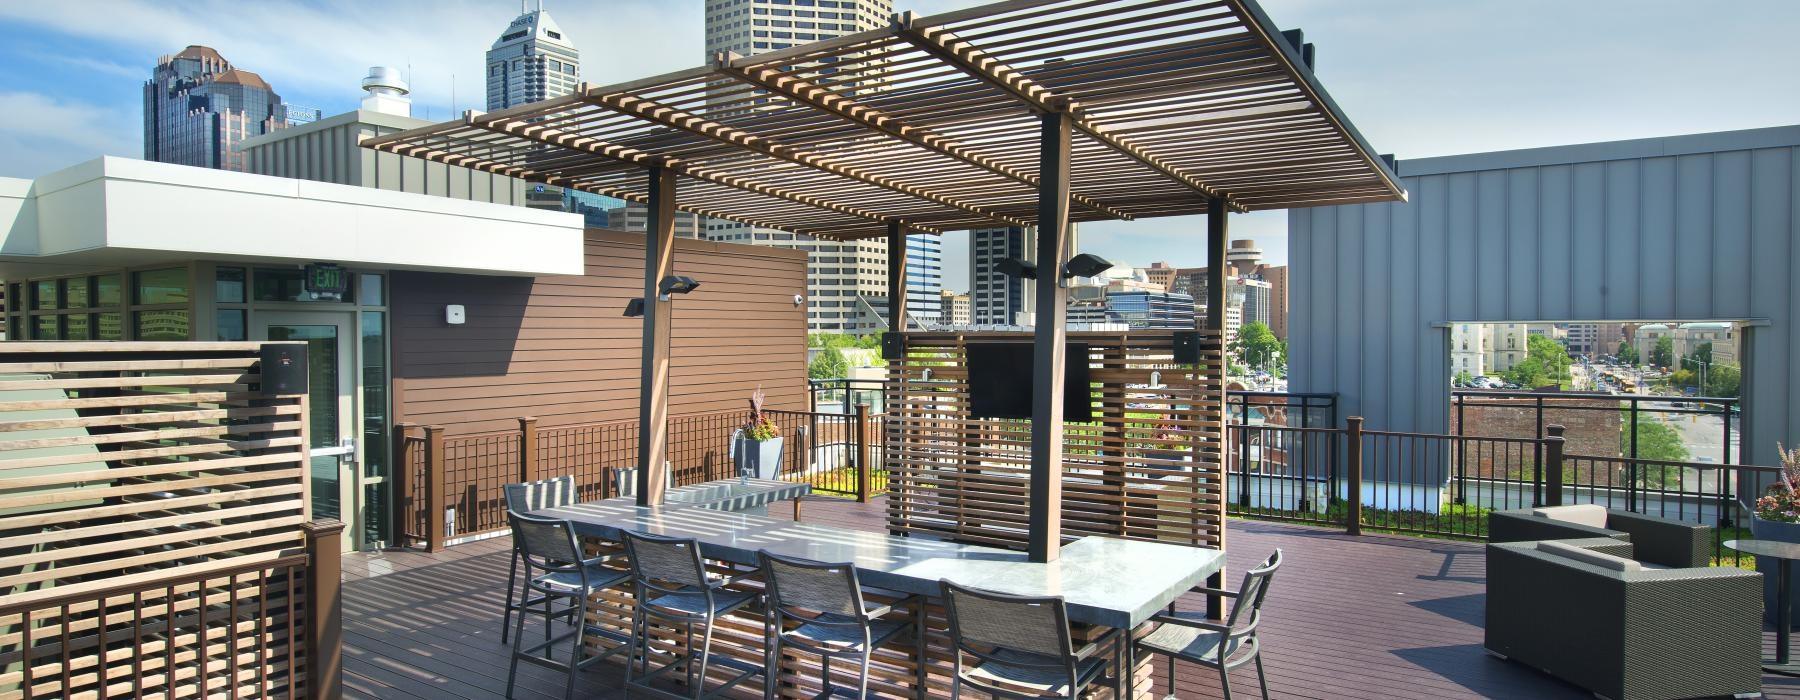 a patio with tables and chairs on it with buildings in the background